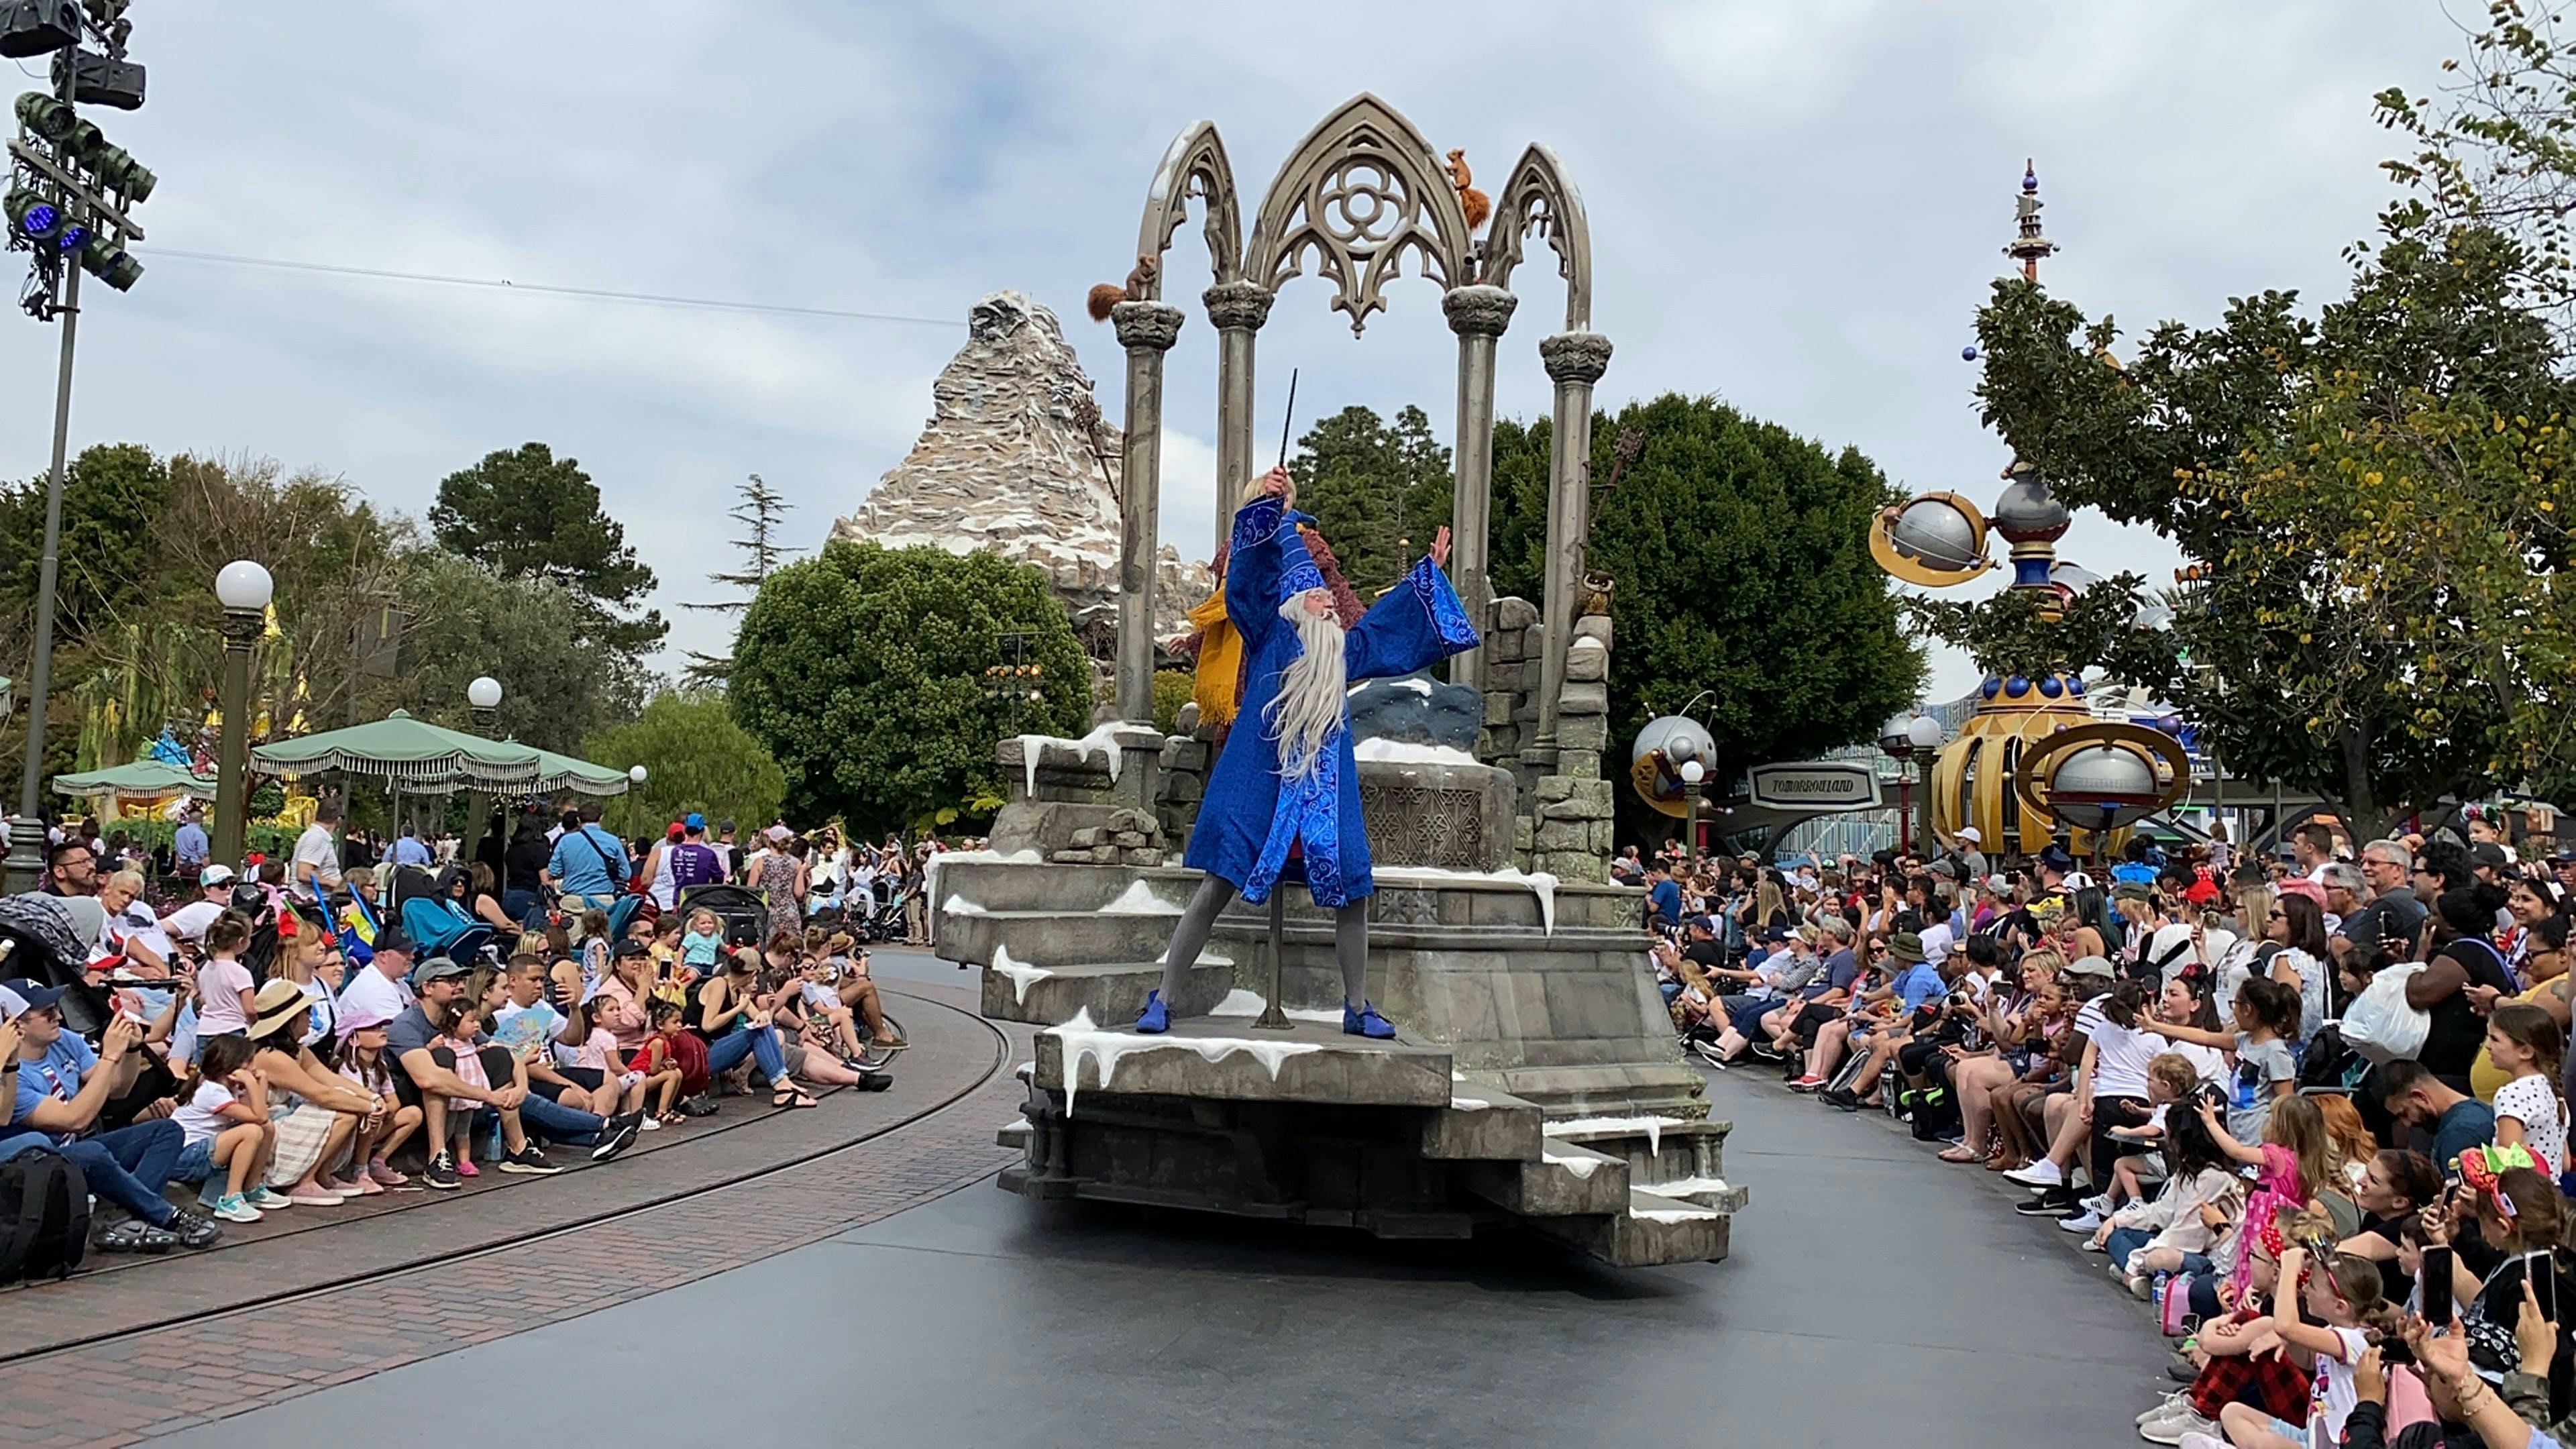 This is the Moment Magic Was Made For: Disneyland Park's 'Magic Happens'  Parade Theme Song and Playlist Now Available on Apple Music